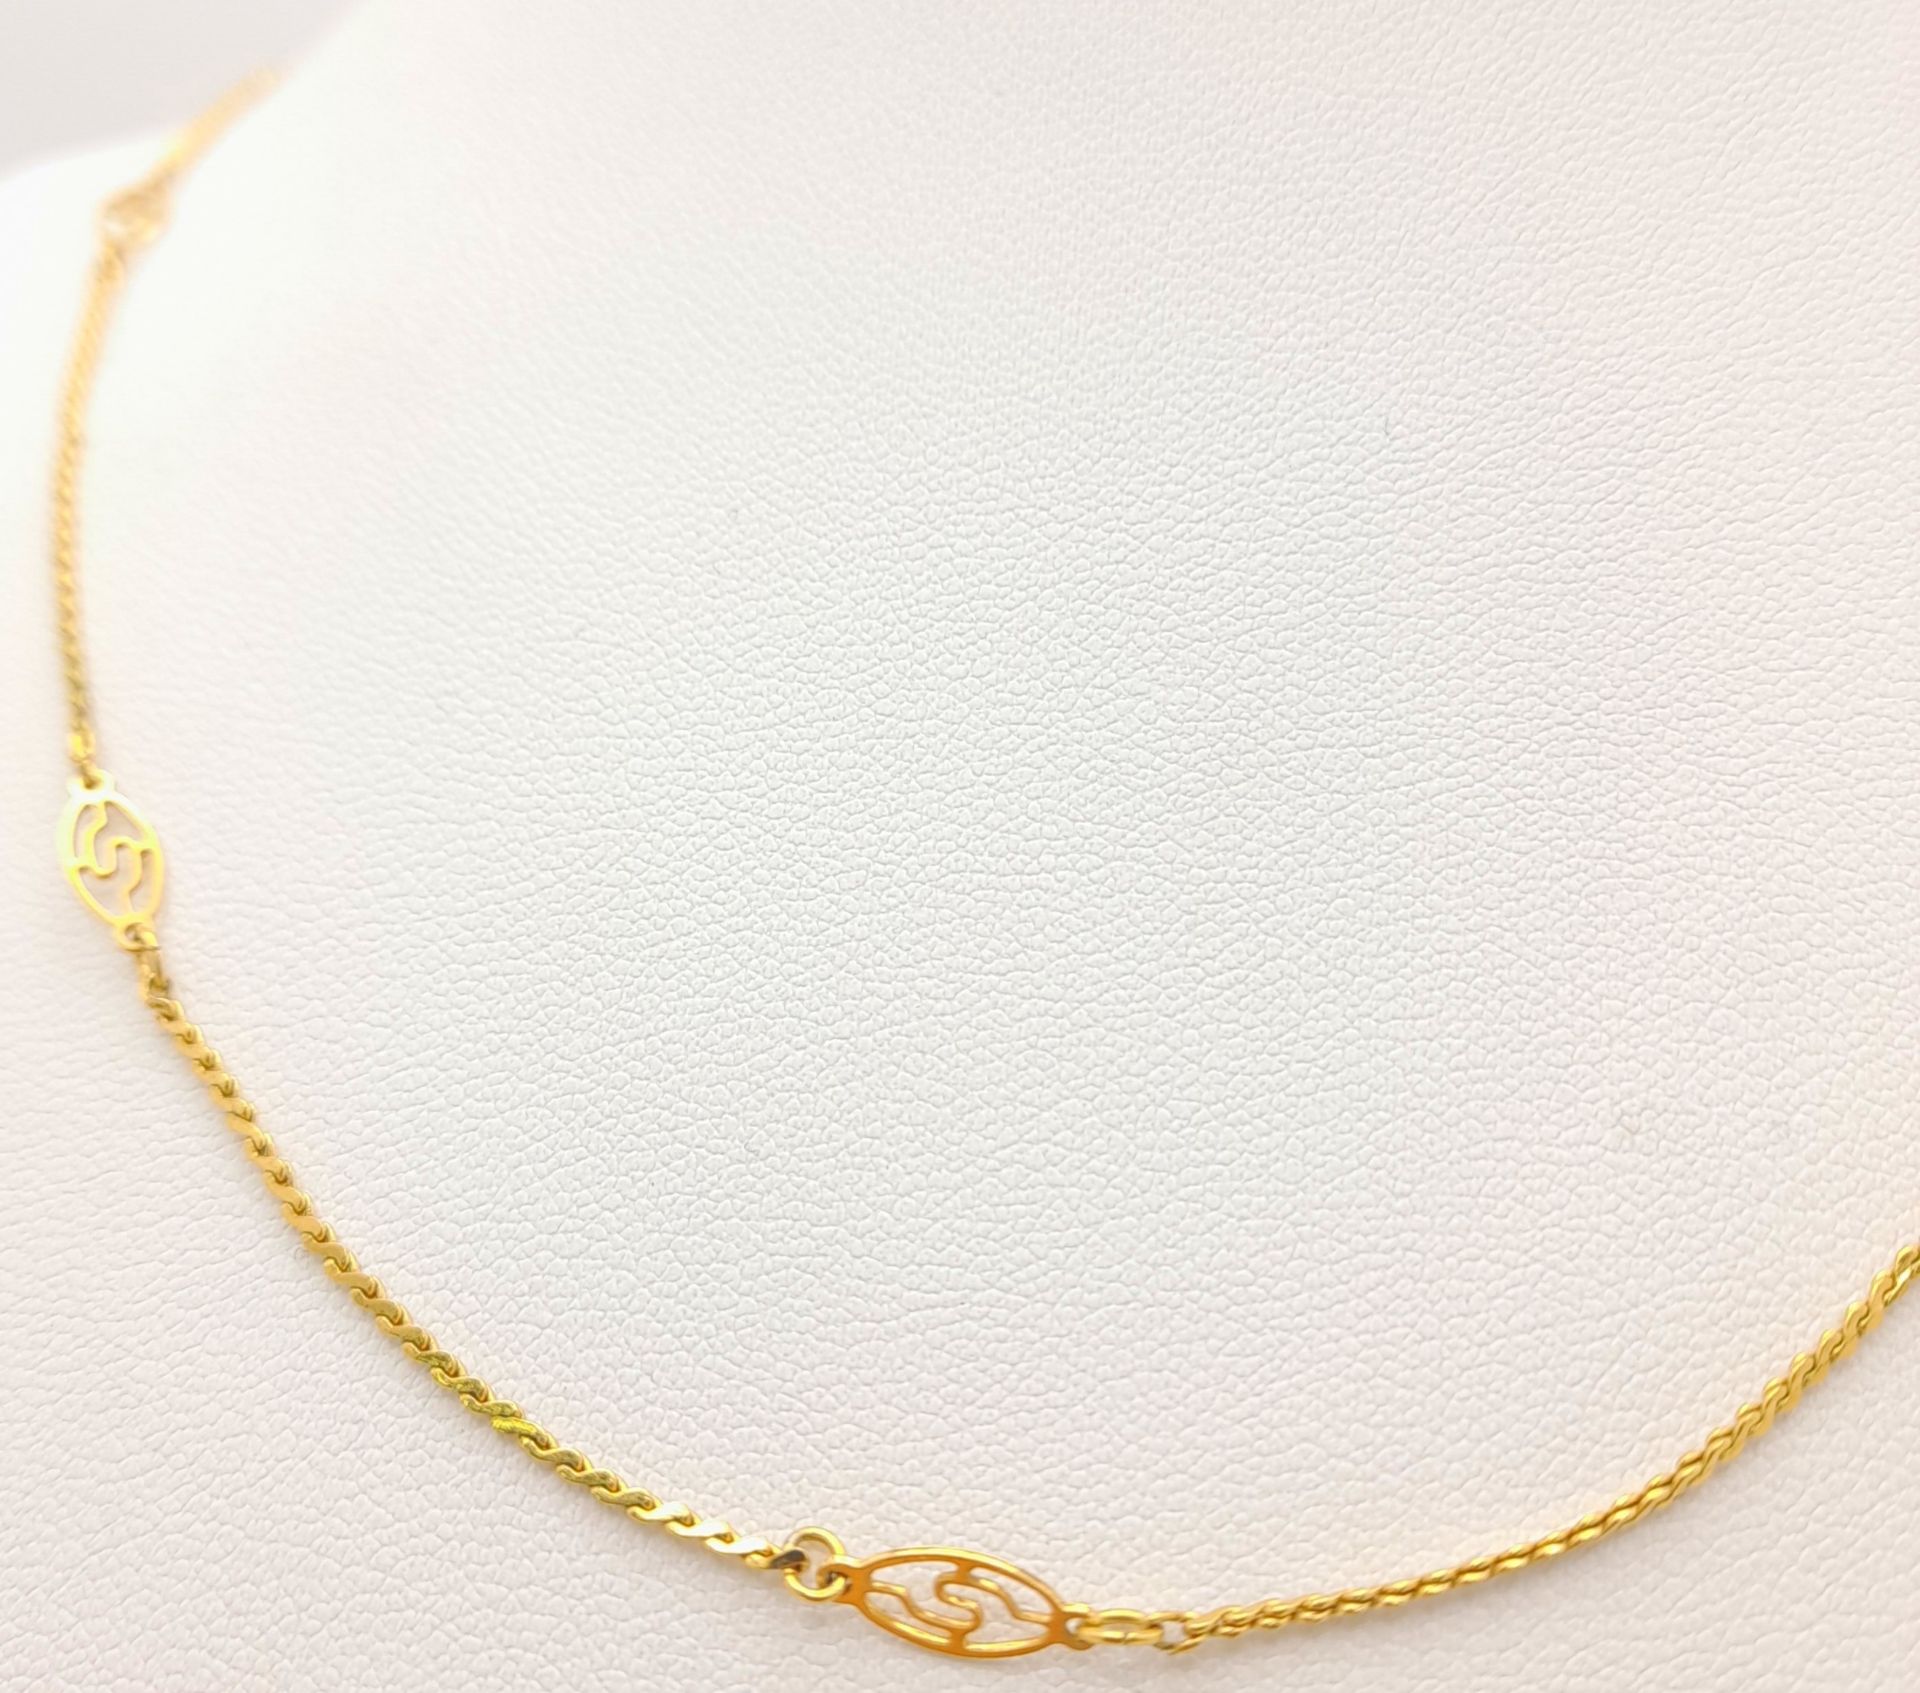 A 9 K yellow gold fancy chain necklace , length: 47 cm, weight: 2.4 g. - Image 2 of 4